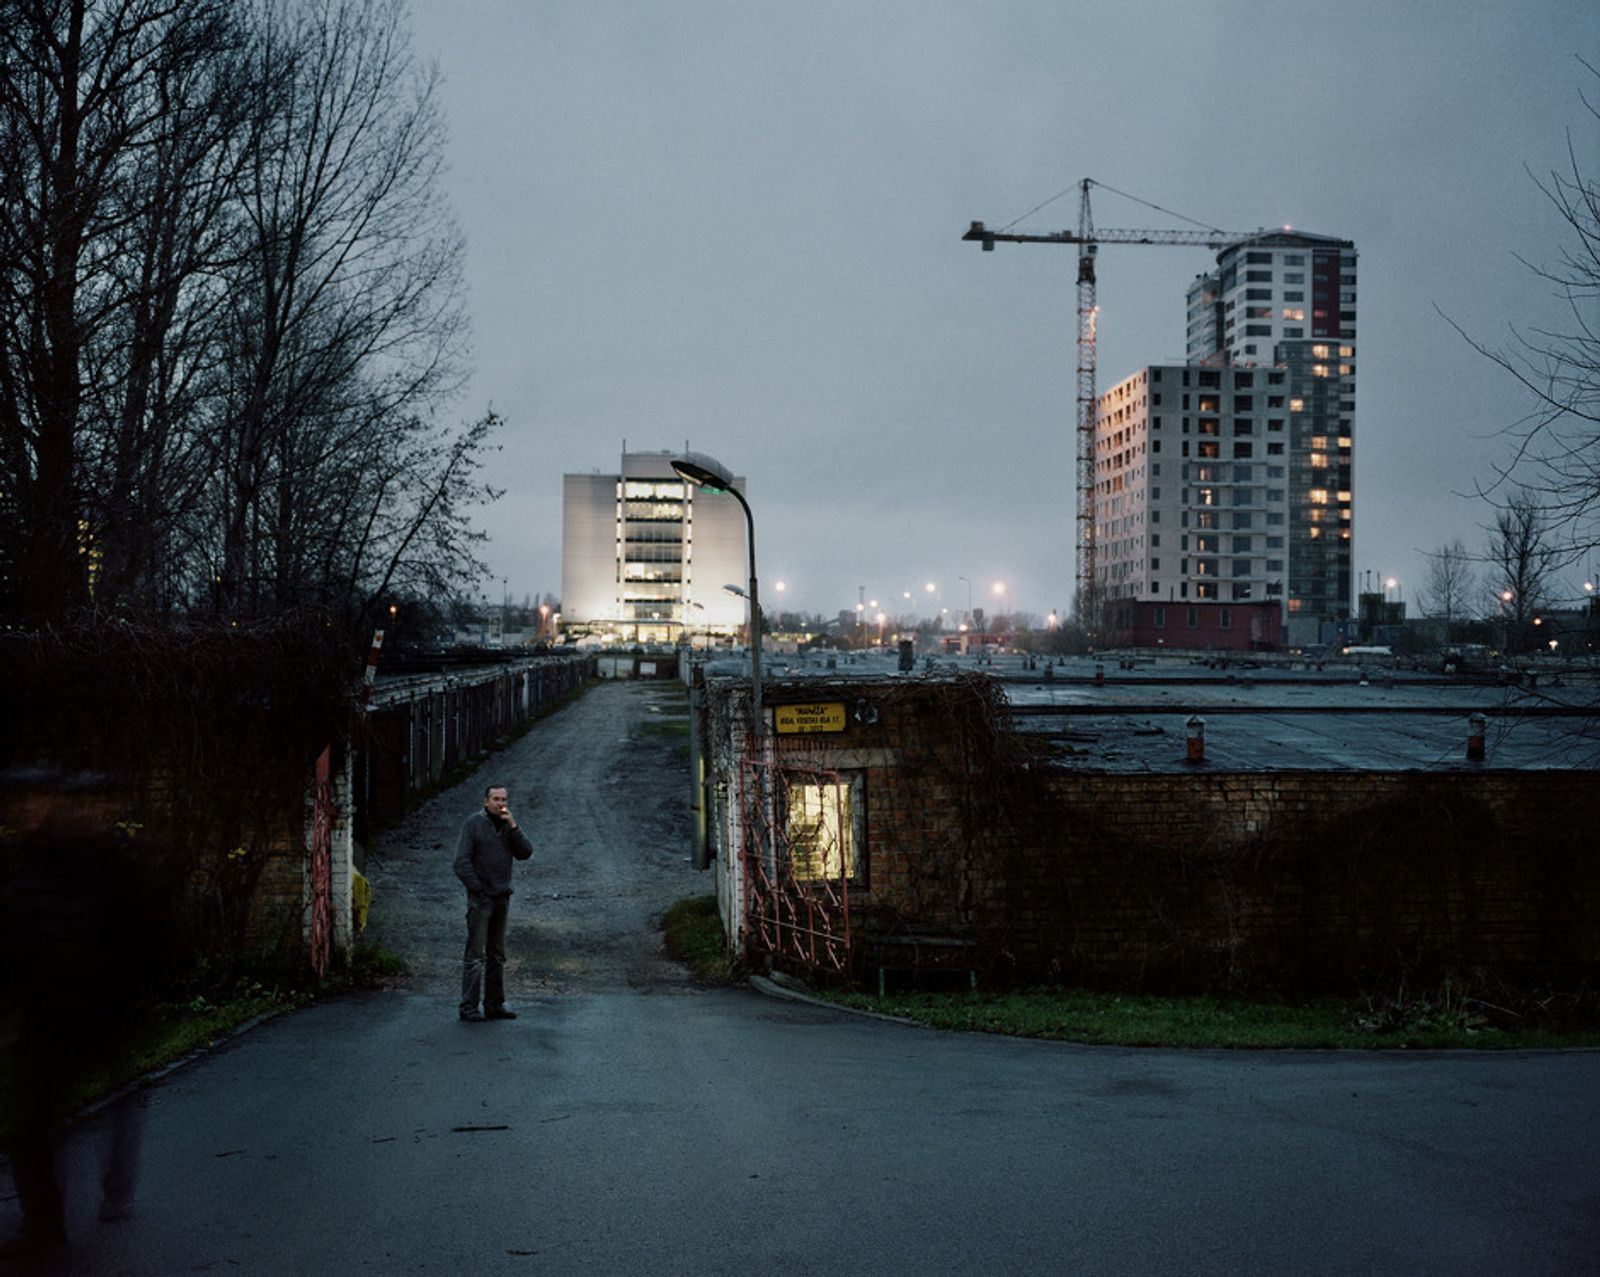 © Reinis Hofmanis - Image from the Territory photography project